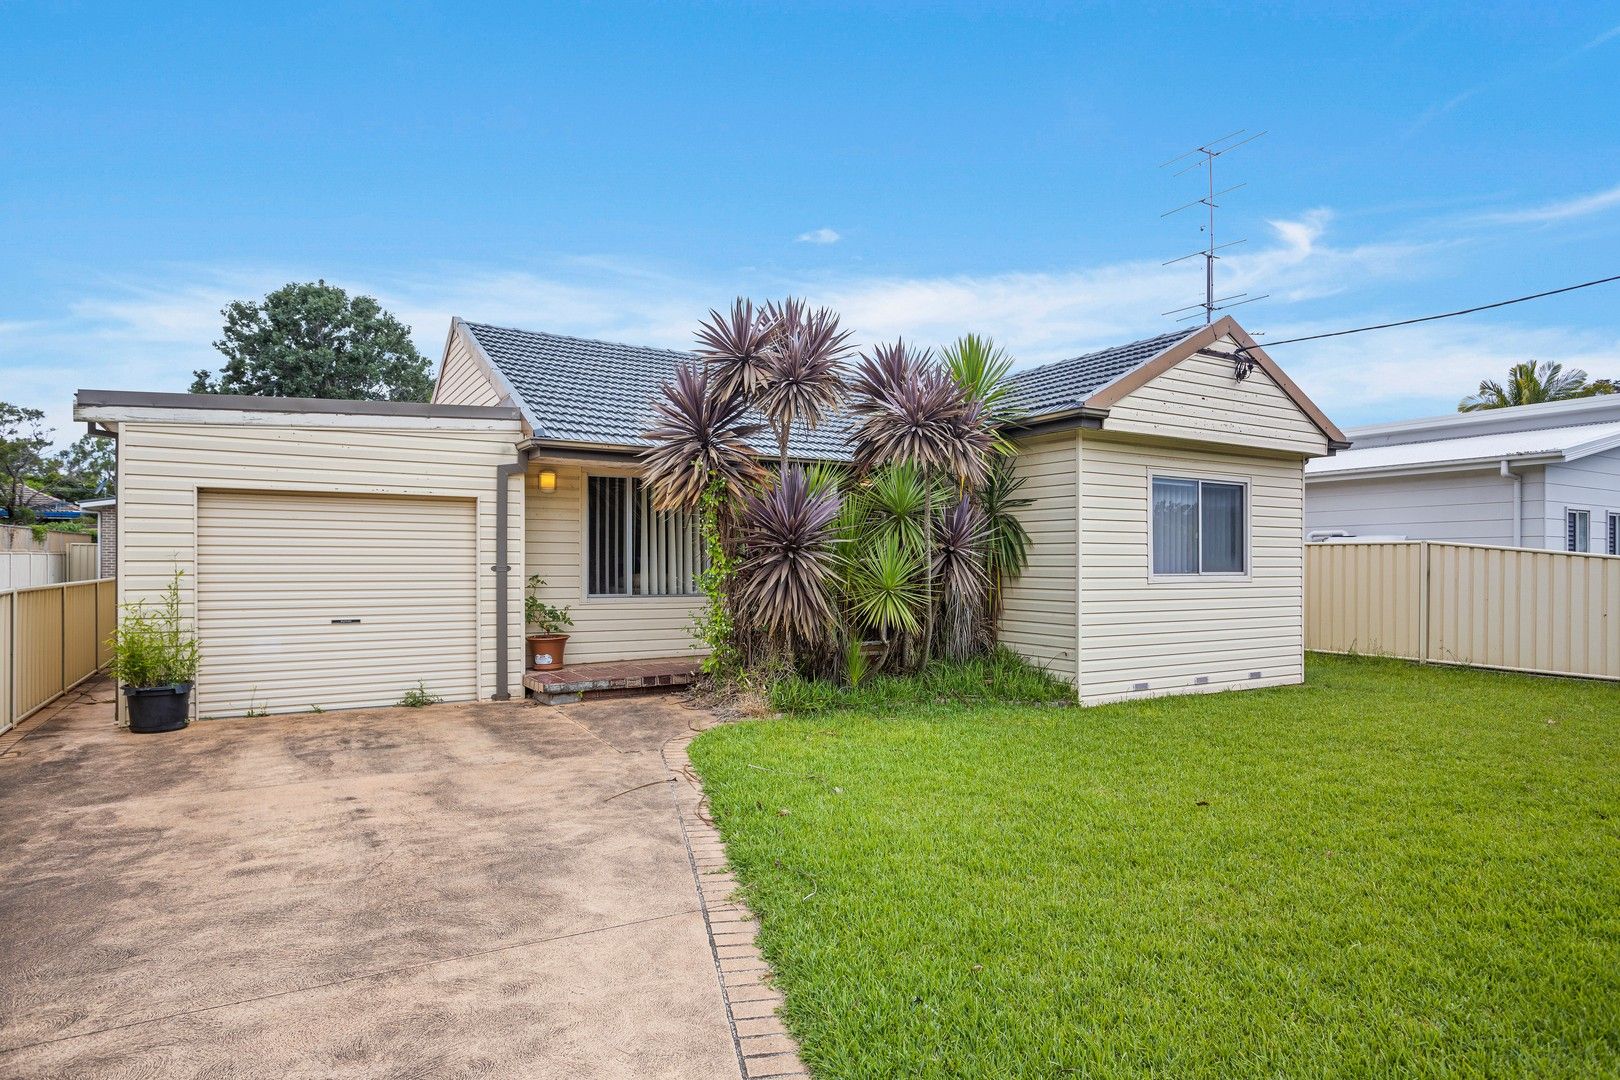 3 bedrooms House in 31 Station Road ALBION PARK RAIL NSW, 2527